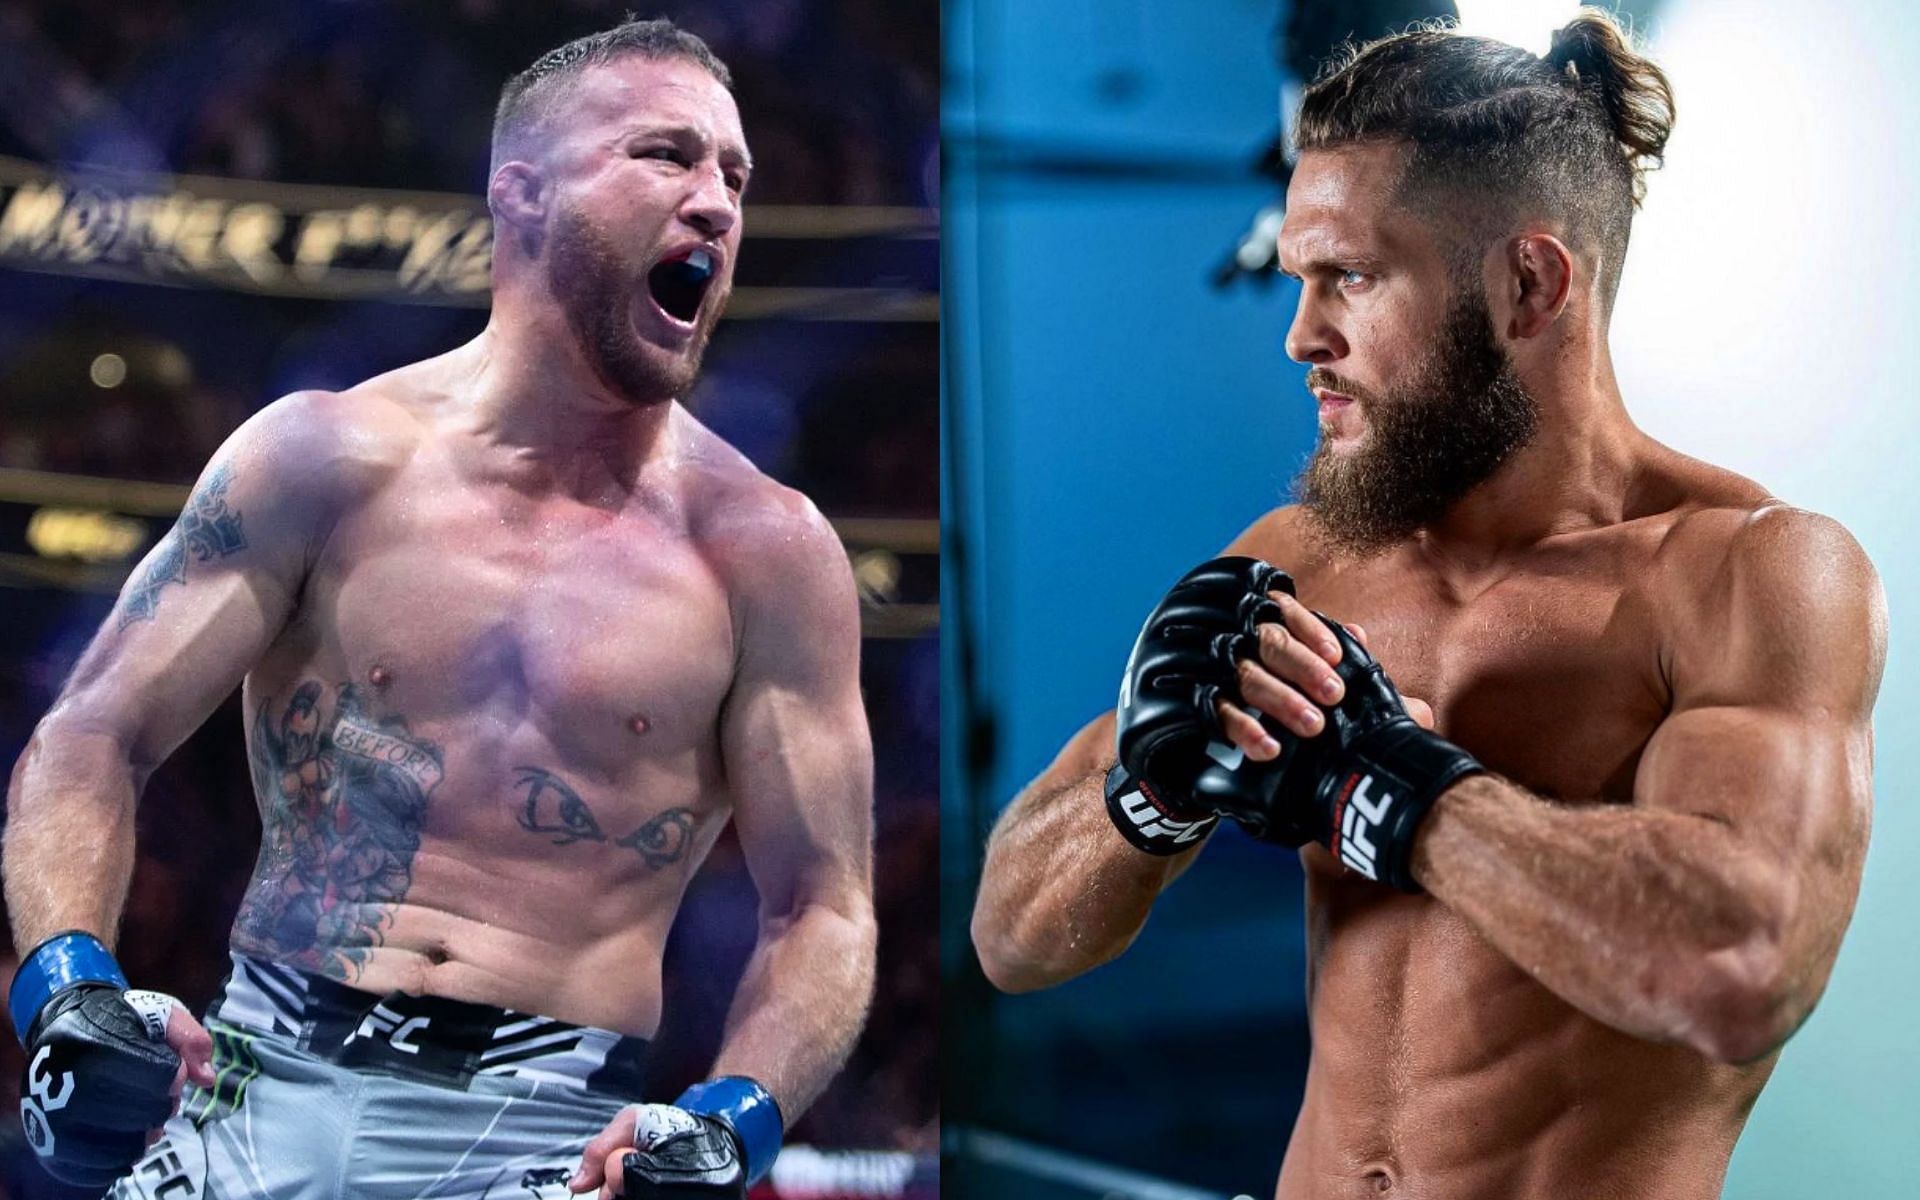 Rafael Fiziev (right) responds to Justin Gaethje (left) after 